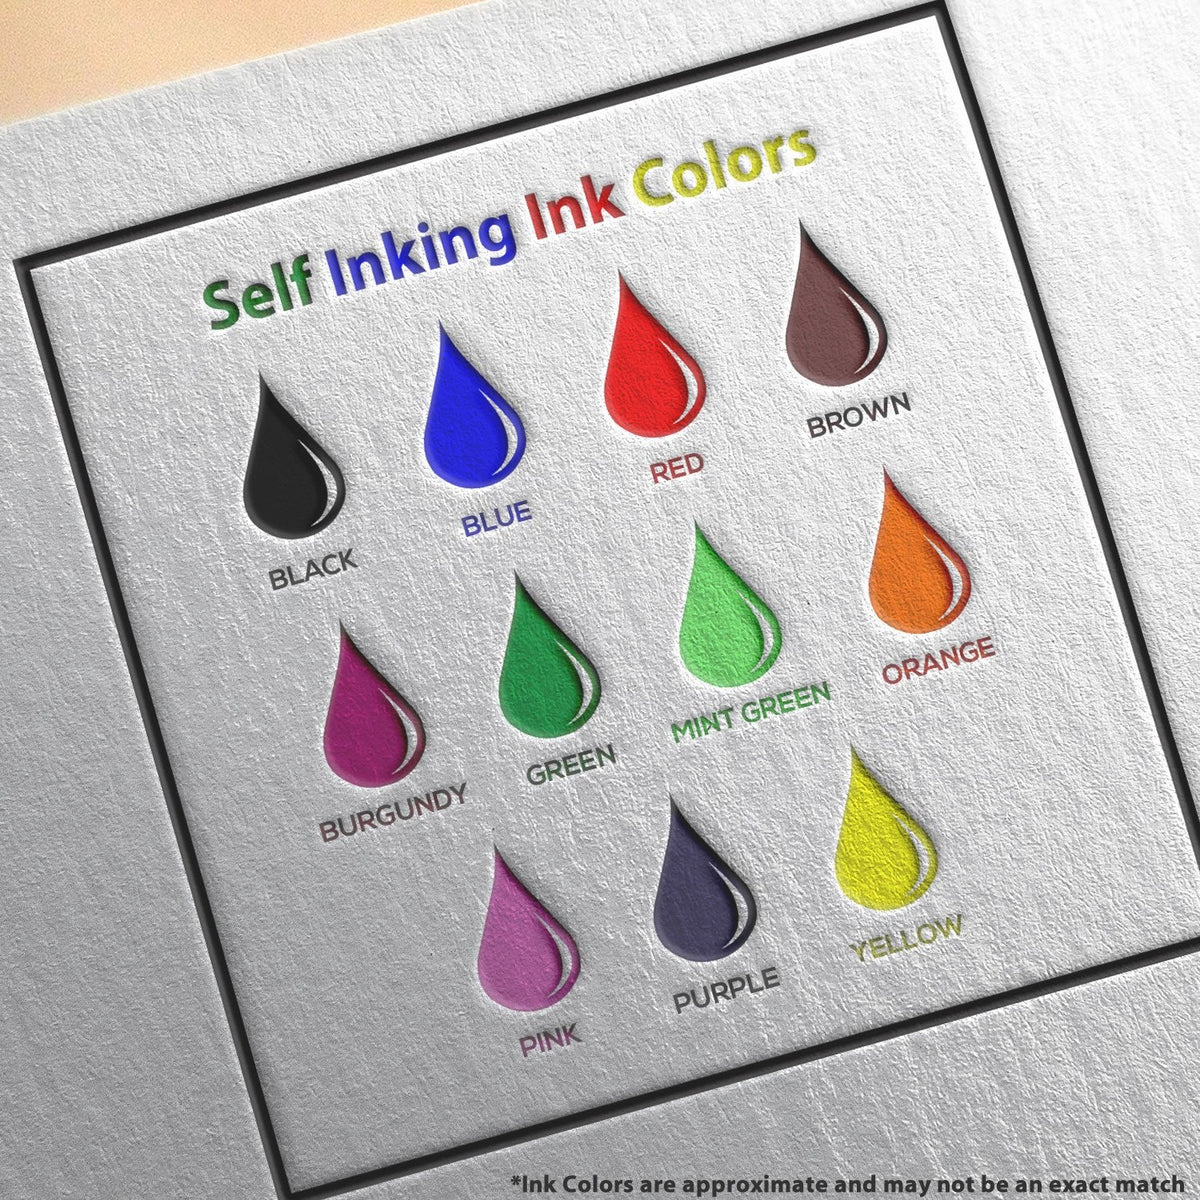 Self Inking Lets Review This Stamp Ink Color Options